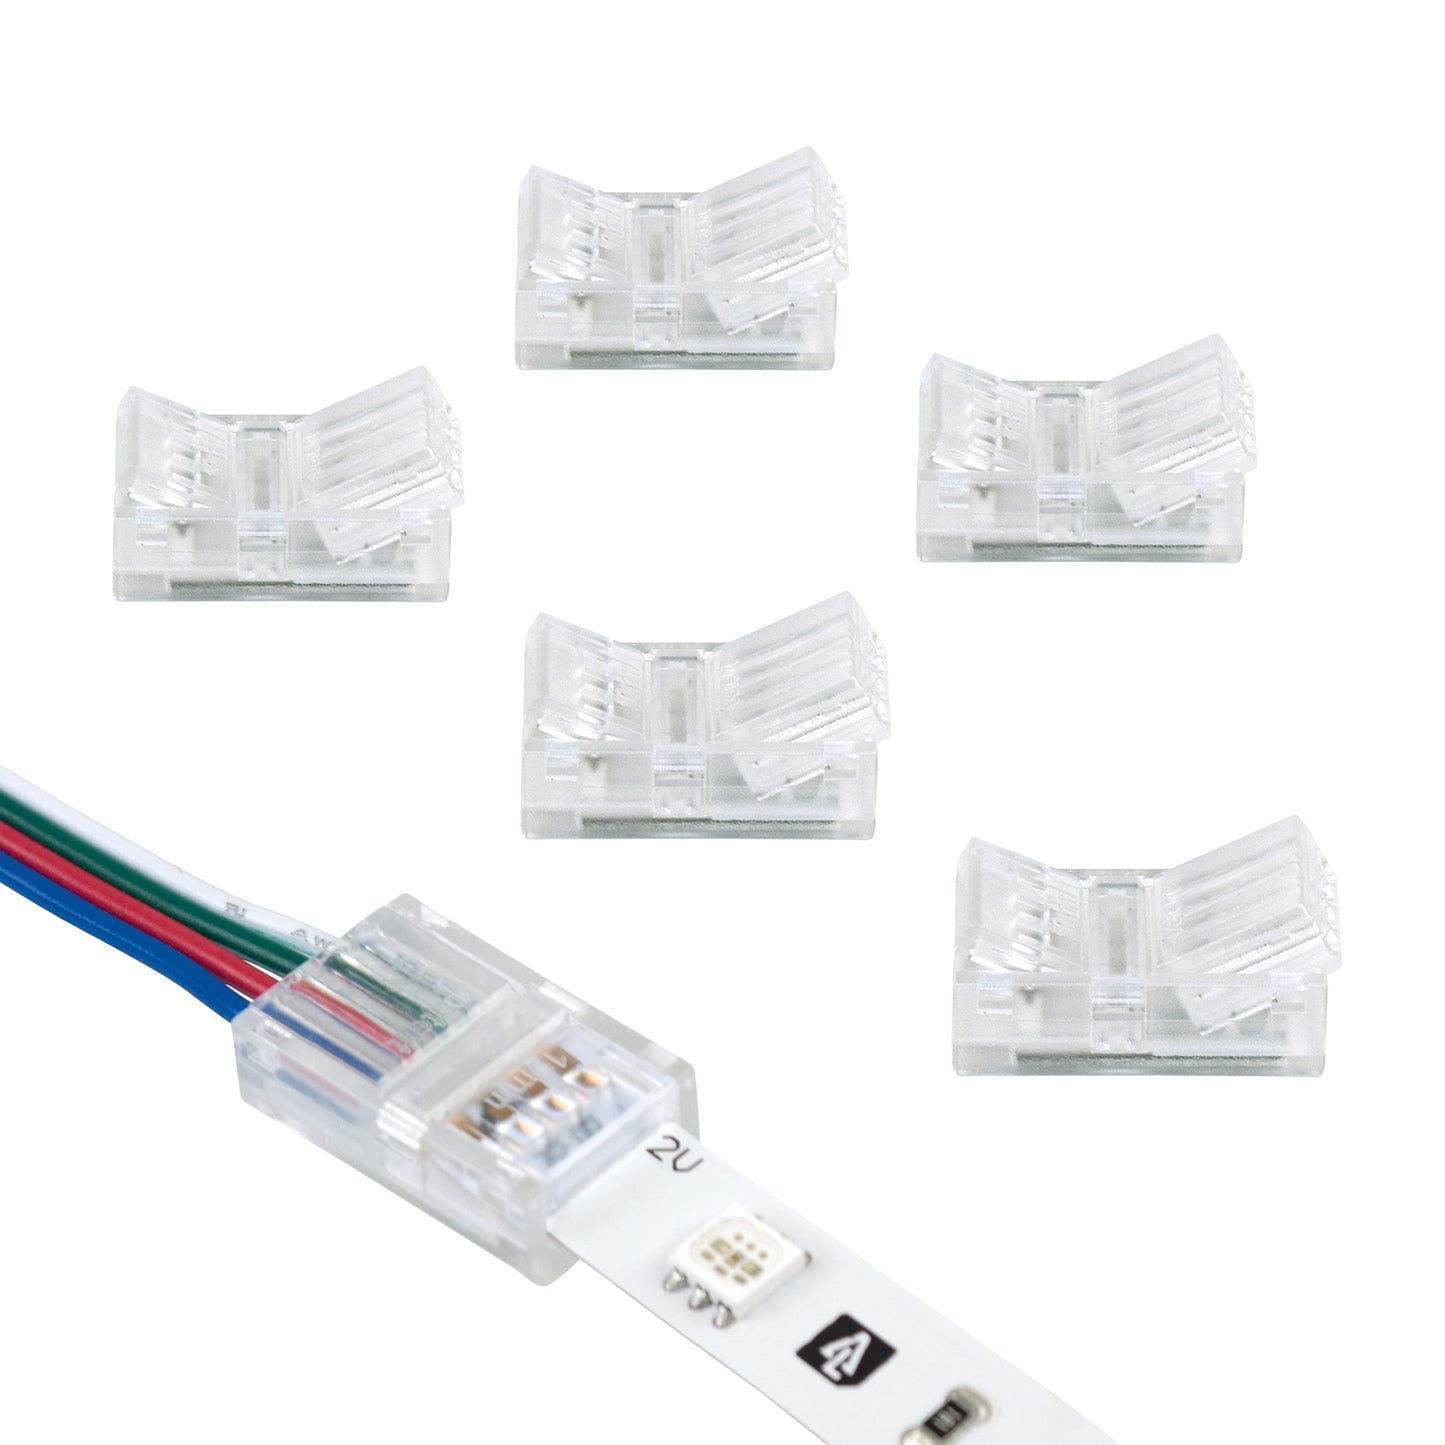 4 Pin LED Strip Light RGB Wire to Tape Connector